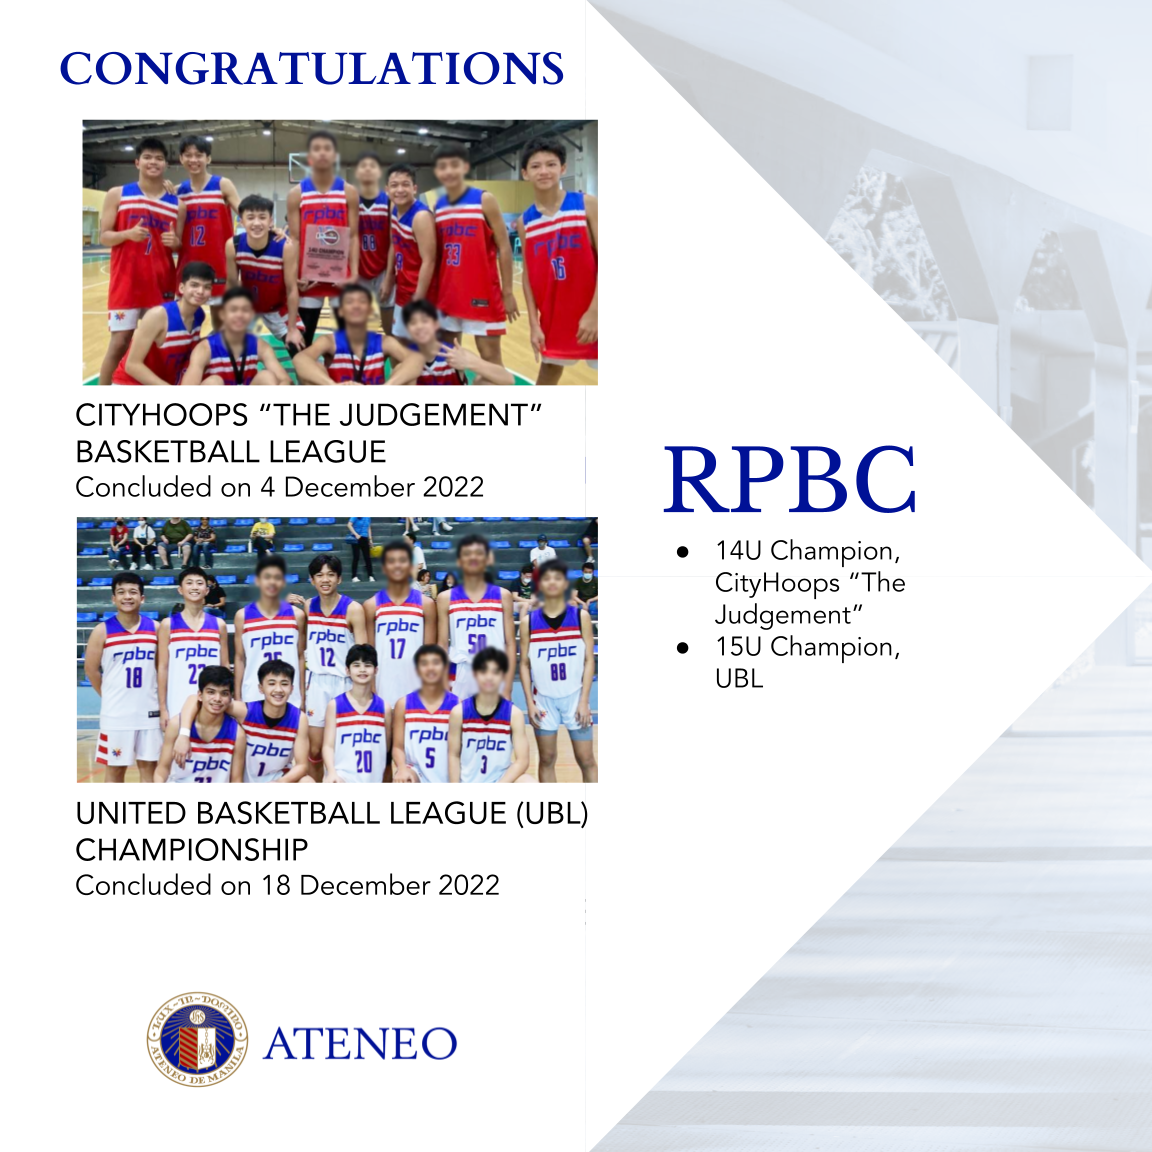 RPBC won its 9th and 10th basketball championships in December 2022. 